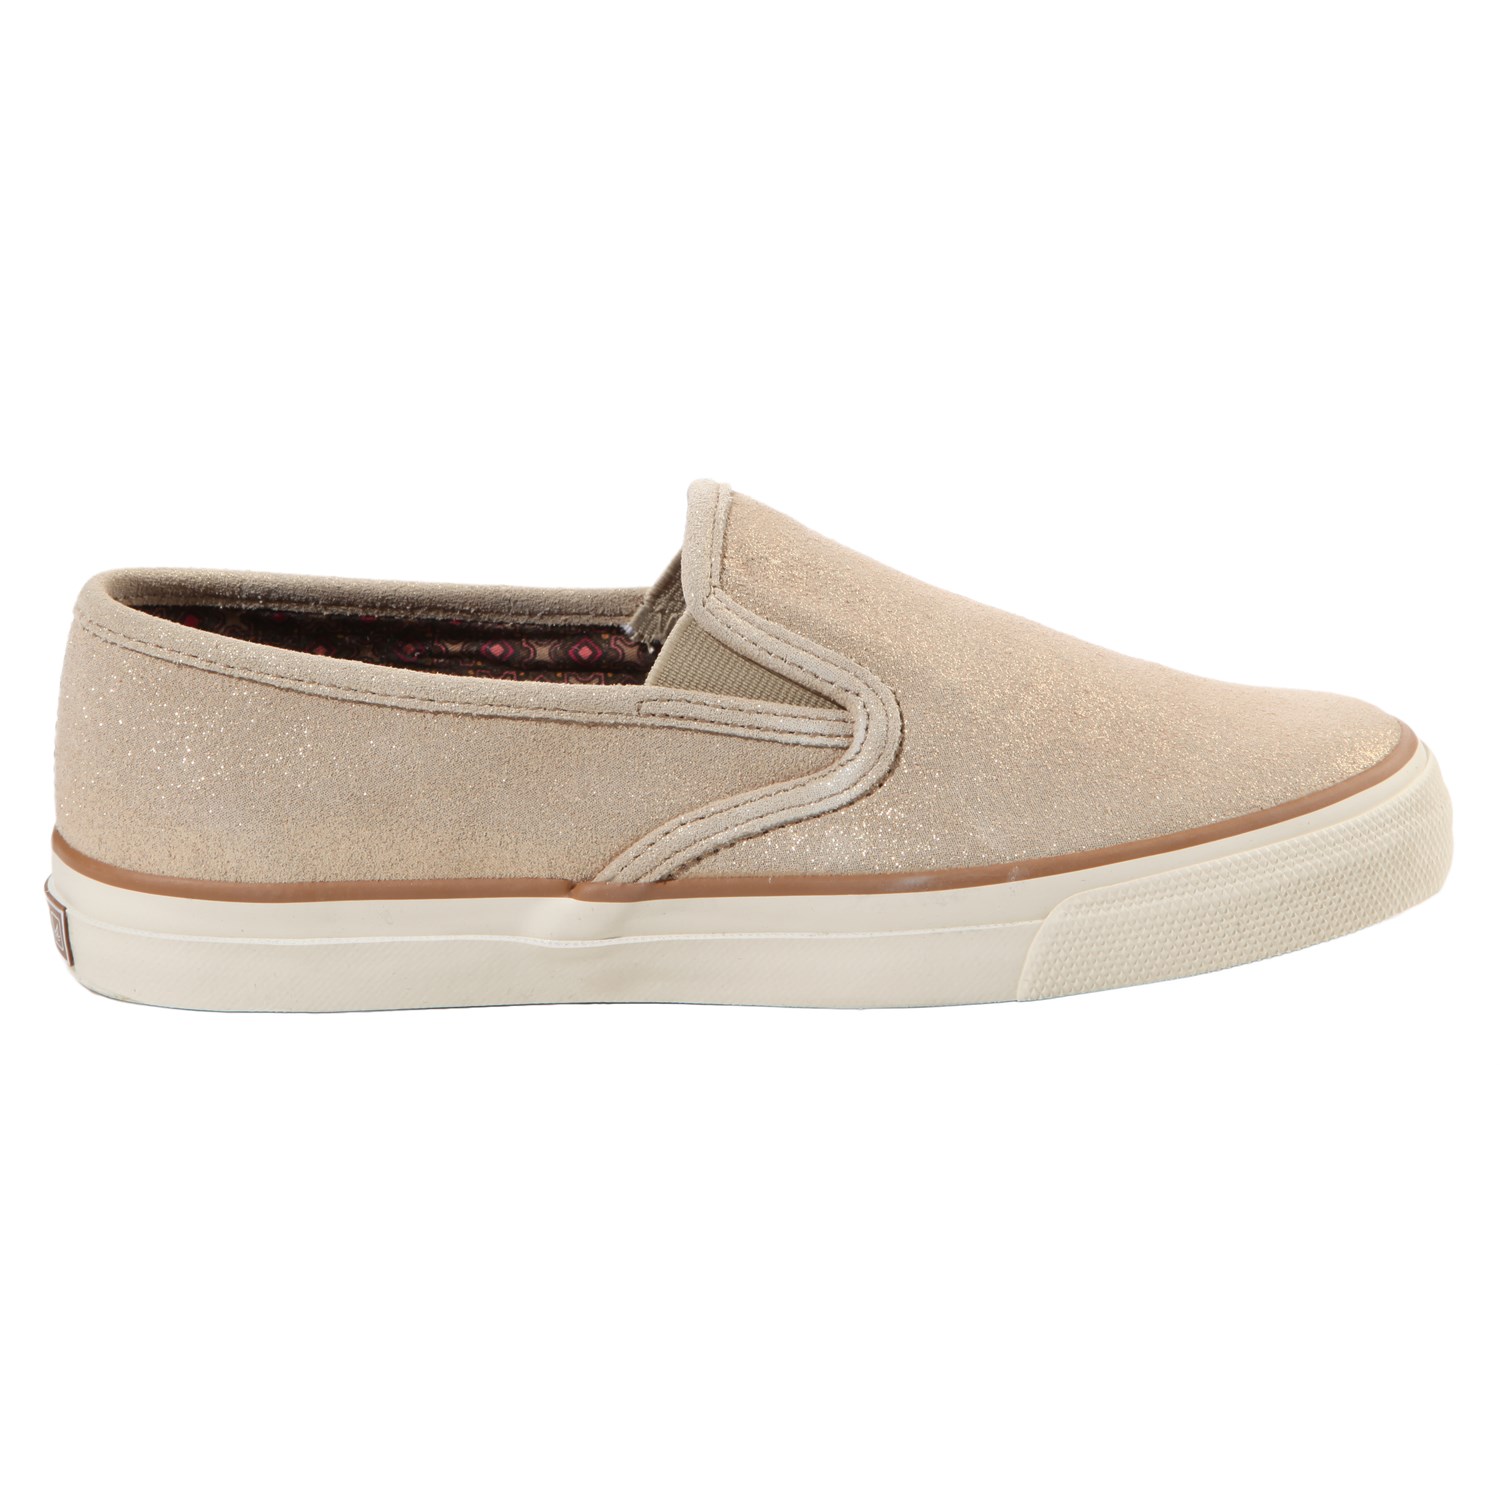 Sperry Mariner Gore Slip On Shoes 